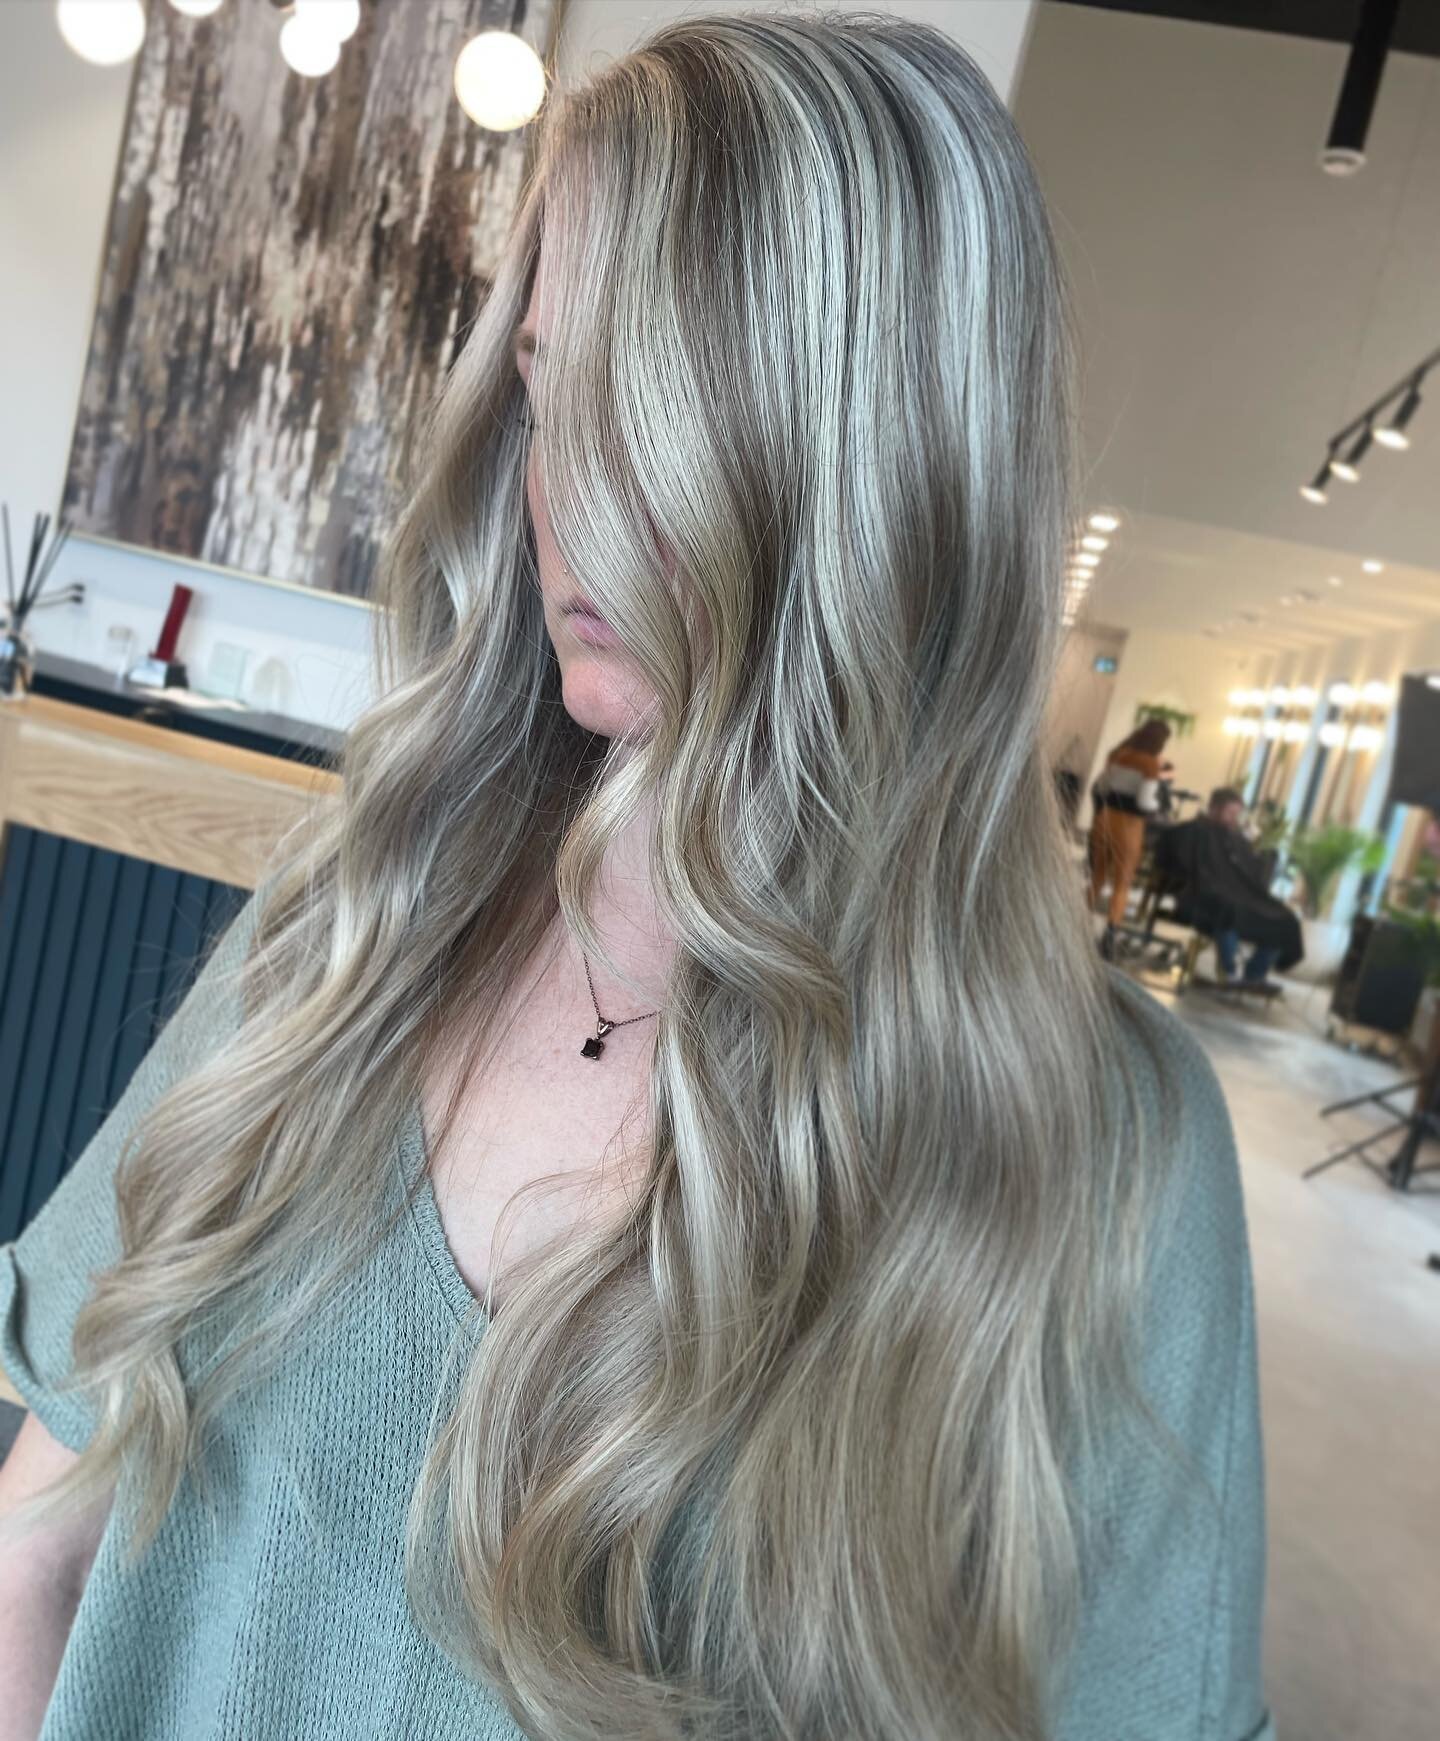 So much fun visiting with my old friend and giving her some amazing hair. 😍

#passionsbeautystudio #blonde #summerhair #longhair #behindthechair #joico #joicoblondelife #joicocolor #warman #warmansalon #summerhairgoals